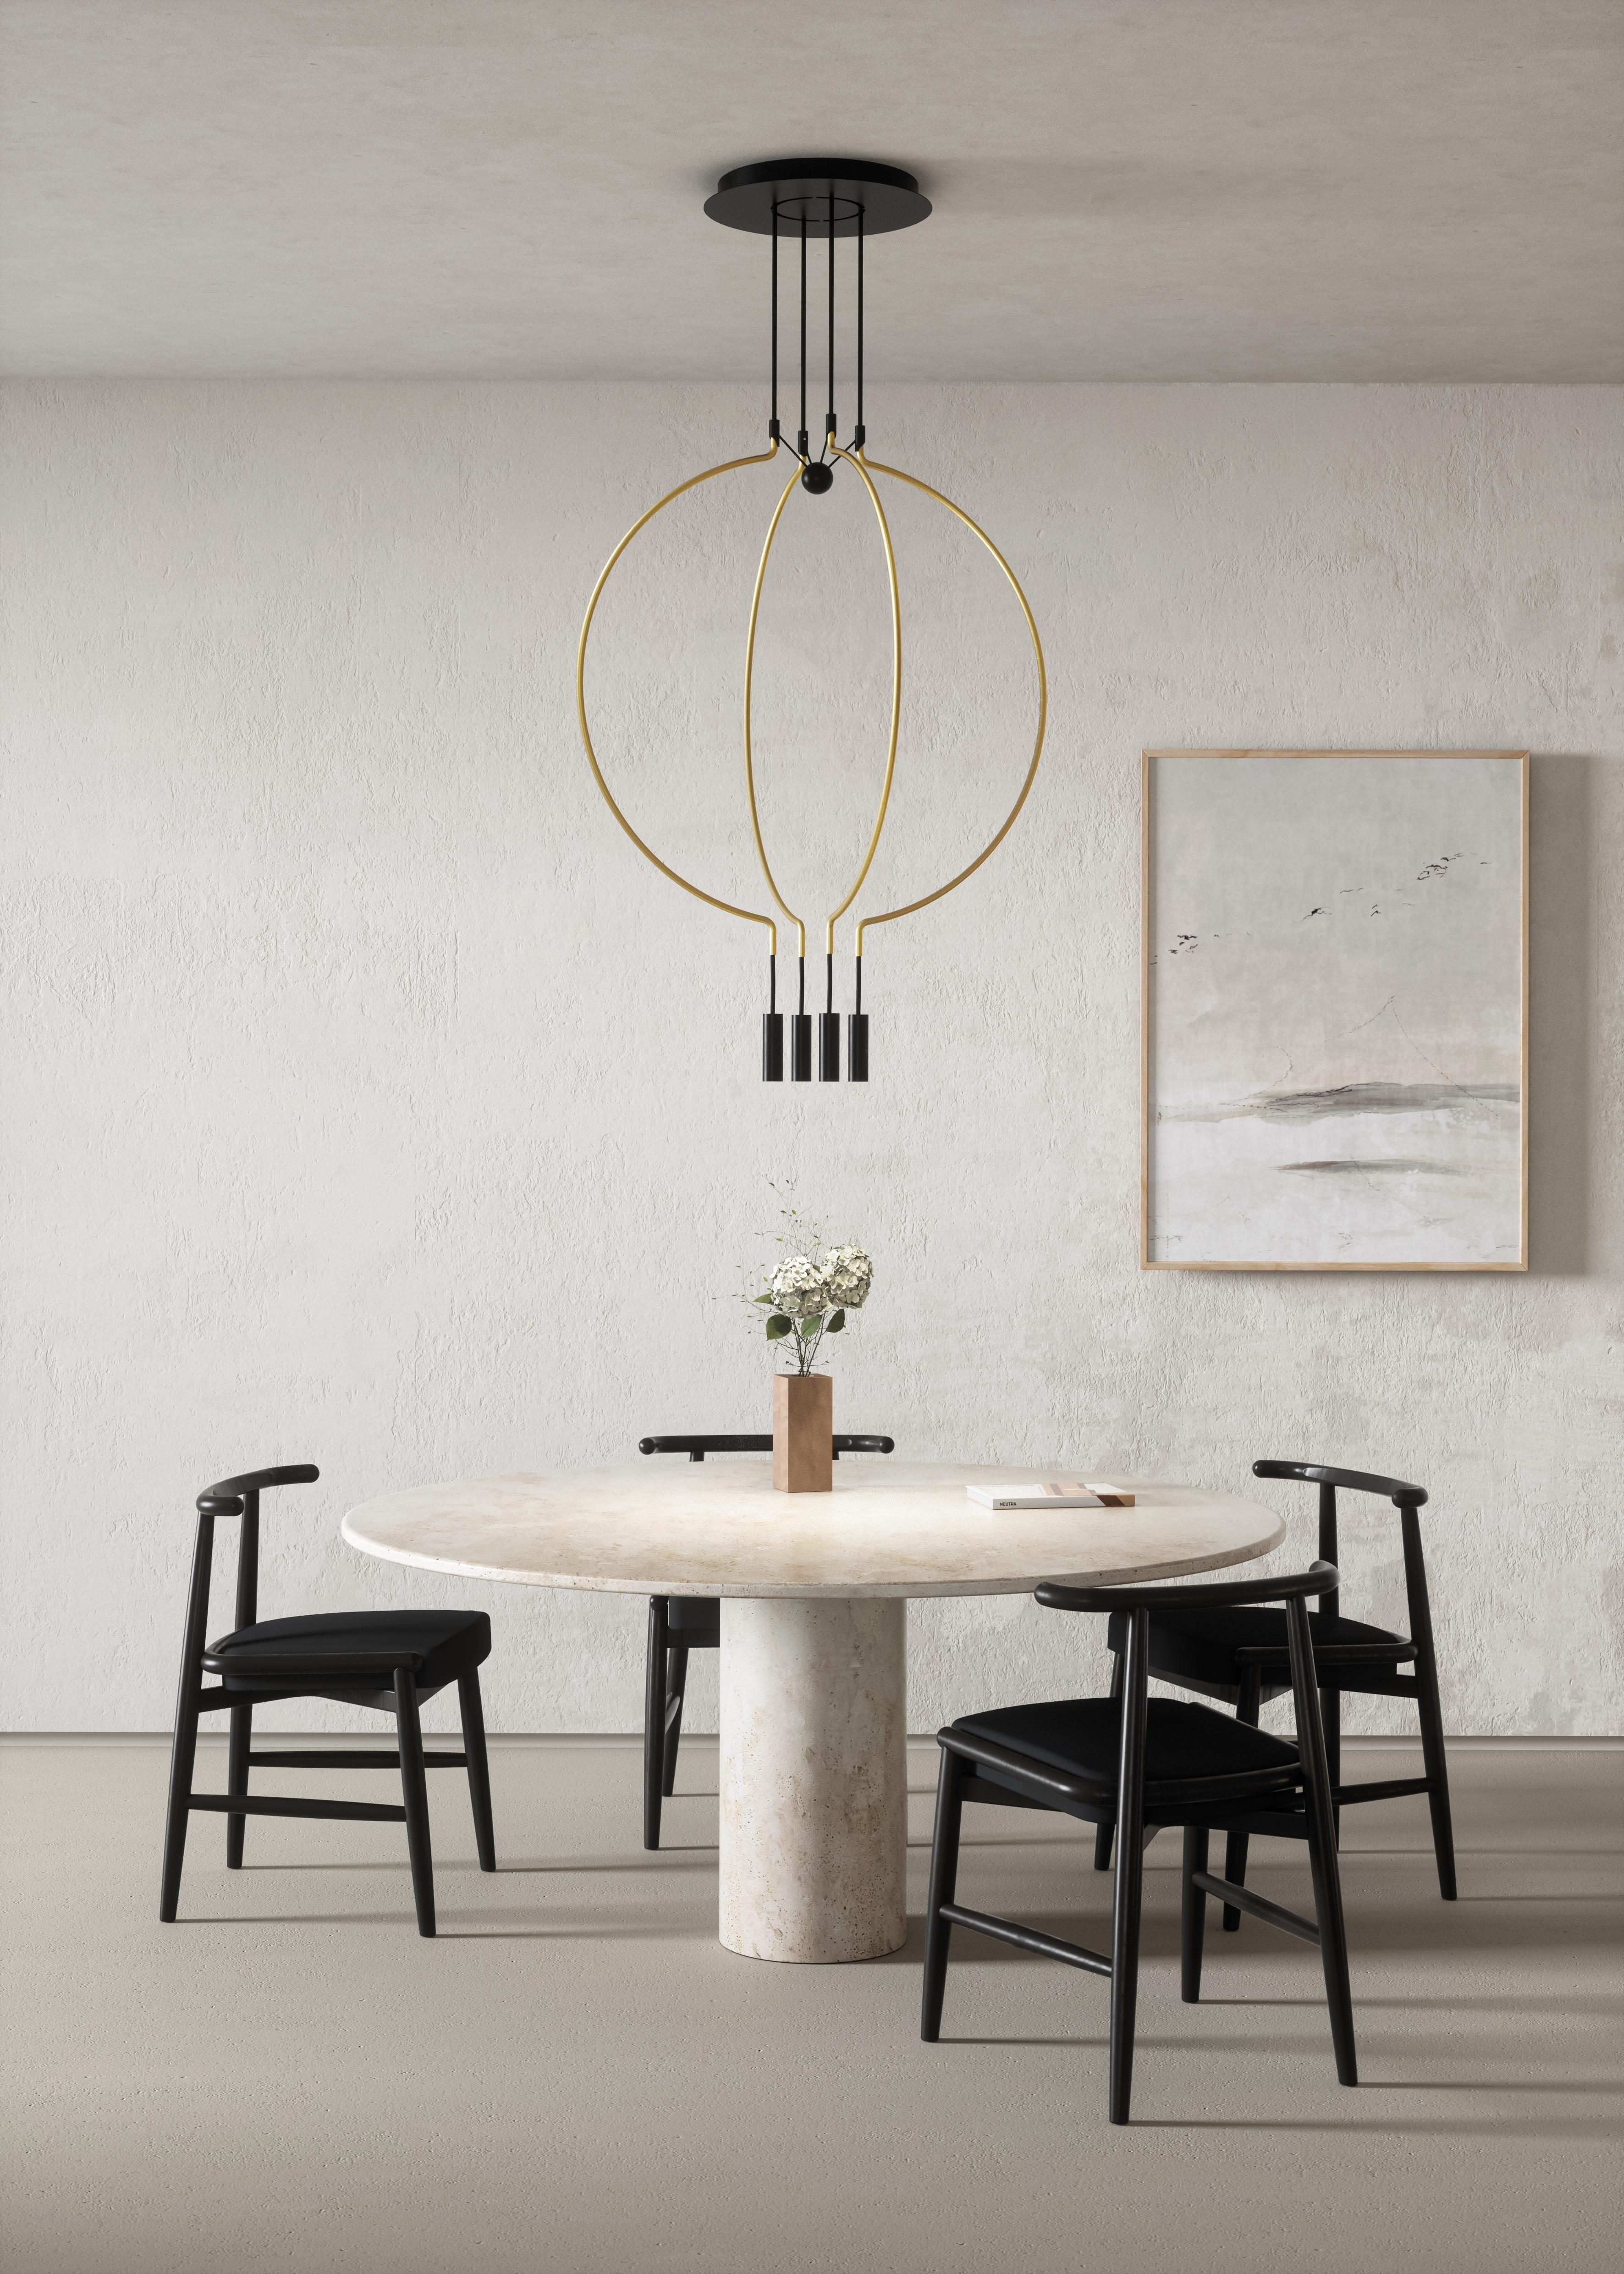 Axolight Liaison Model G8 Pendant Lamp in Black/Gold by Sara Moroni

Modular lightness and elegance. Liaison tells about the perfect balance of three geometric archetypes: sphere, circle and cylinder compose a system that includes the single pendant